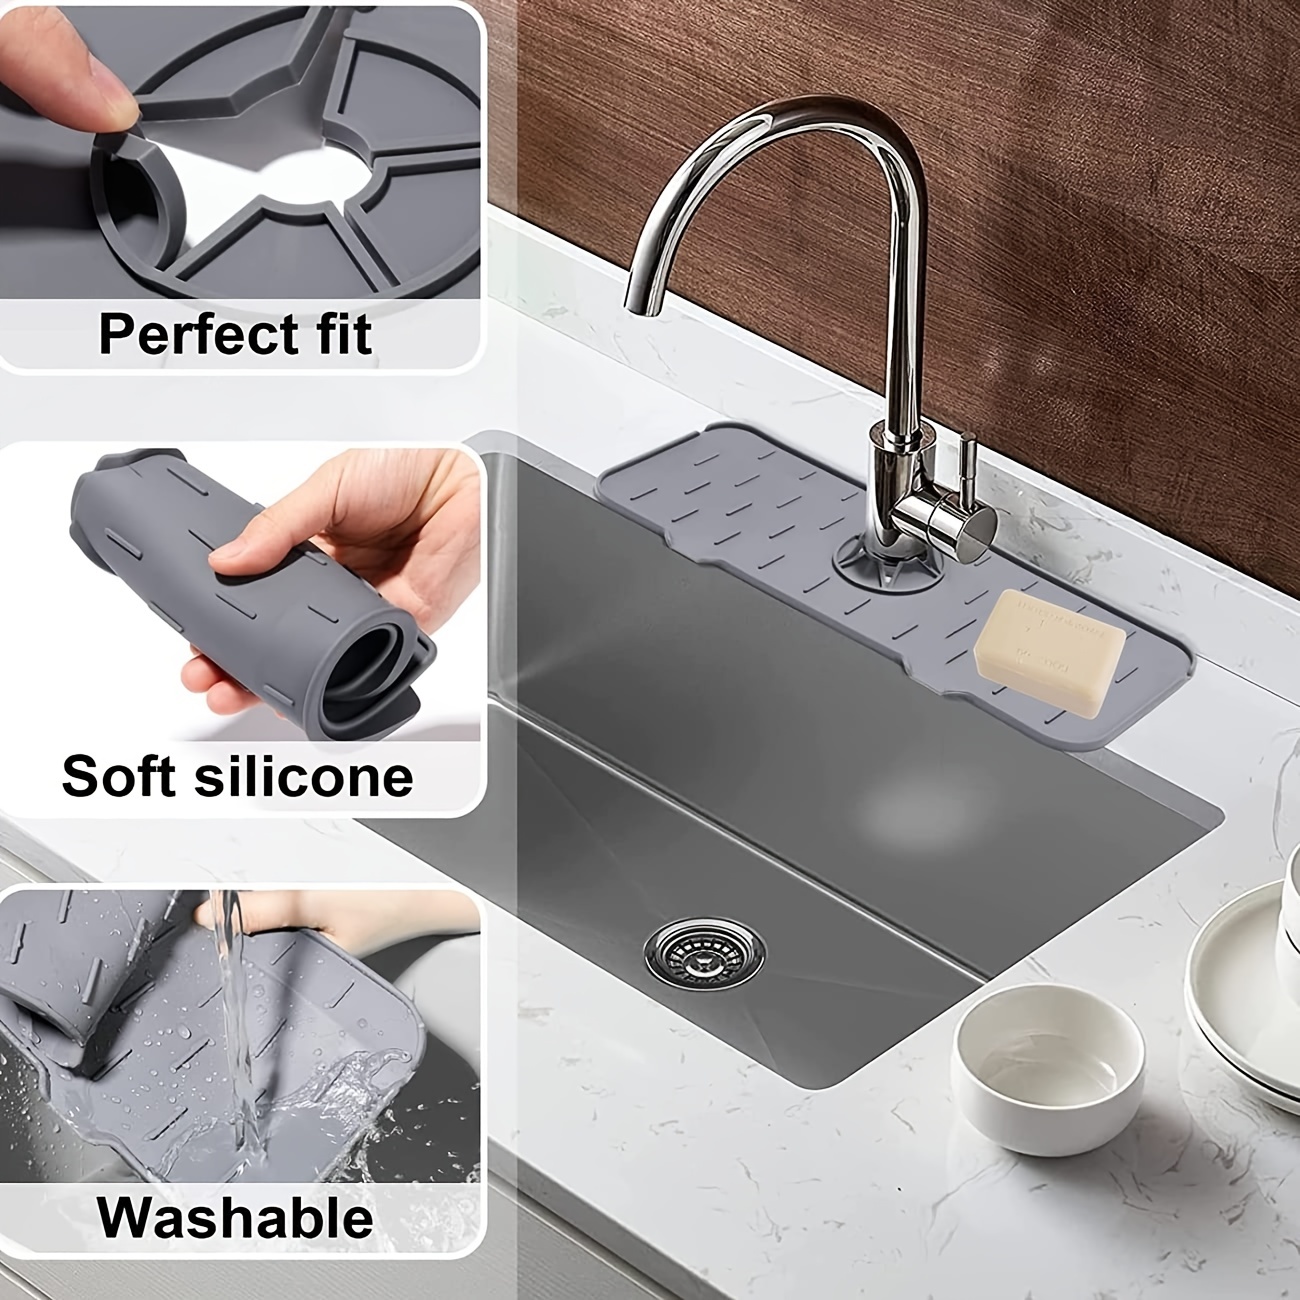  Longer Sink Splash Guard Mat 30 inch, Silicone Faucet Handle  Drip Catcher Tray, Longer Silicone Sink Mat for KitchenBathroom, Drip  Protector Splash Countertop (Grey) : Tools & Home Improvement